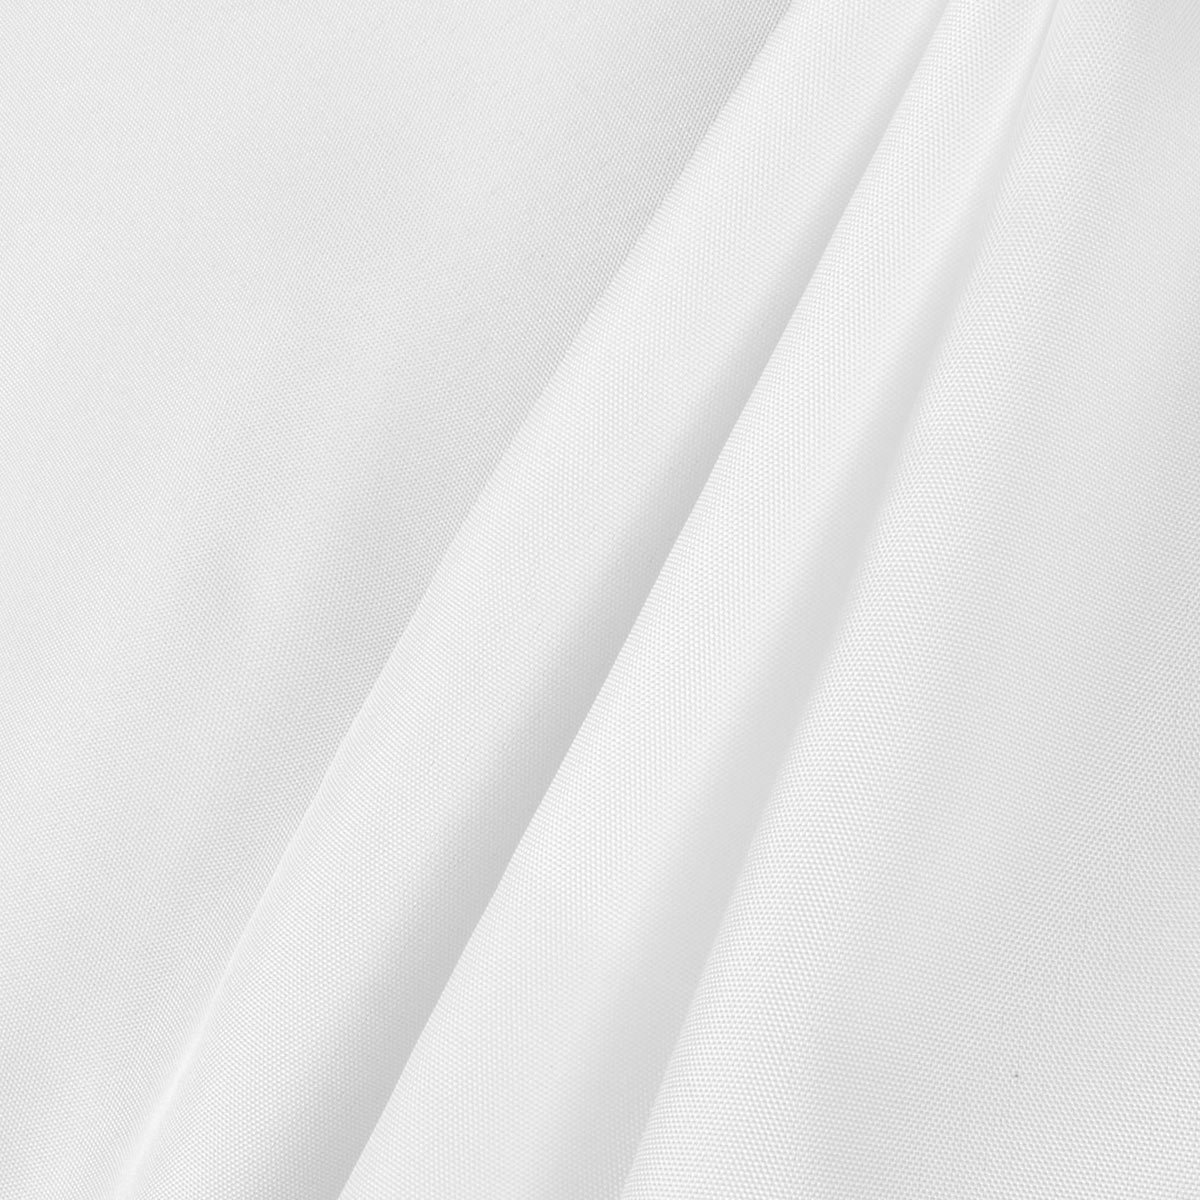 Hanes 701 550 Deluxe FR White Dimout Drapery Lining Fabric ...